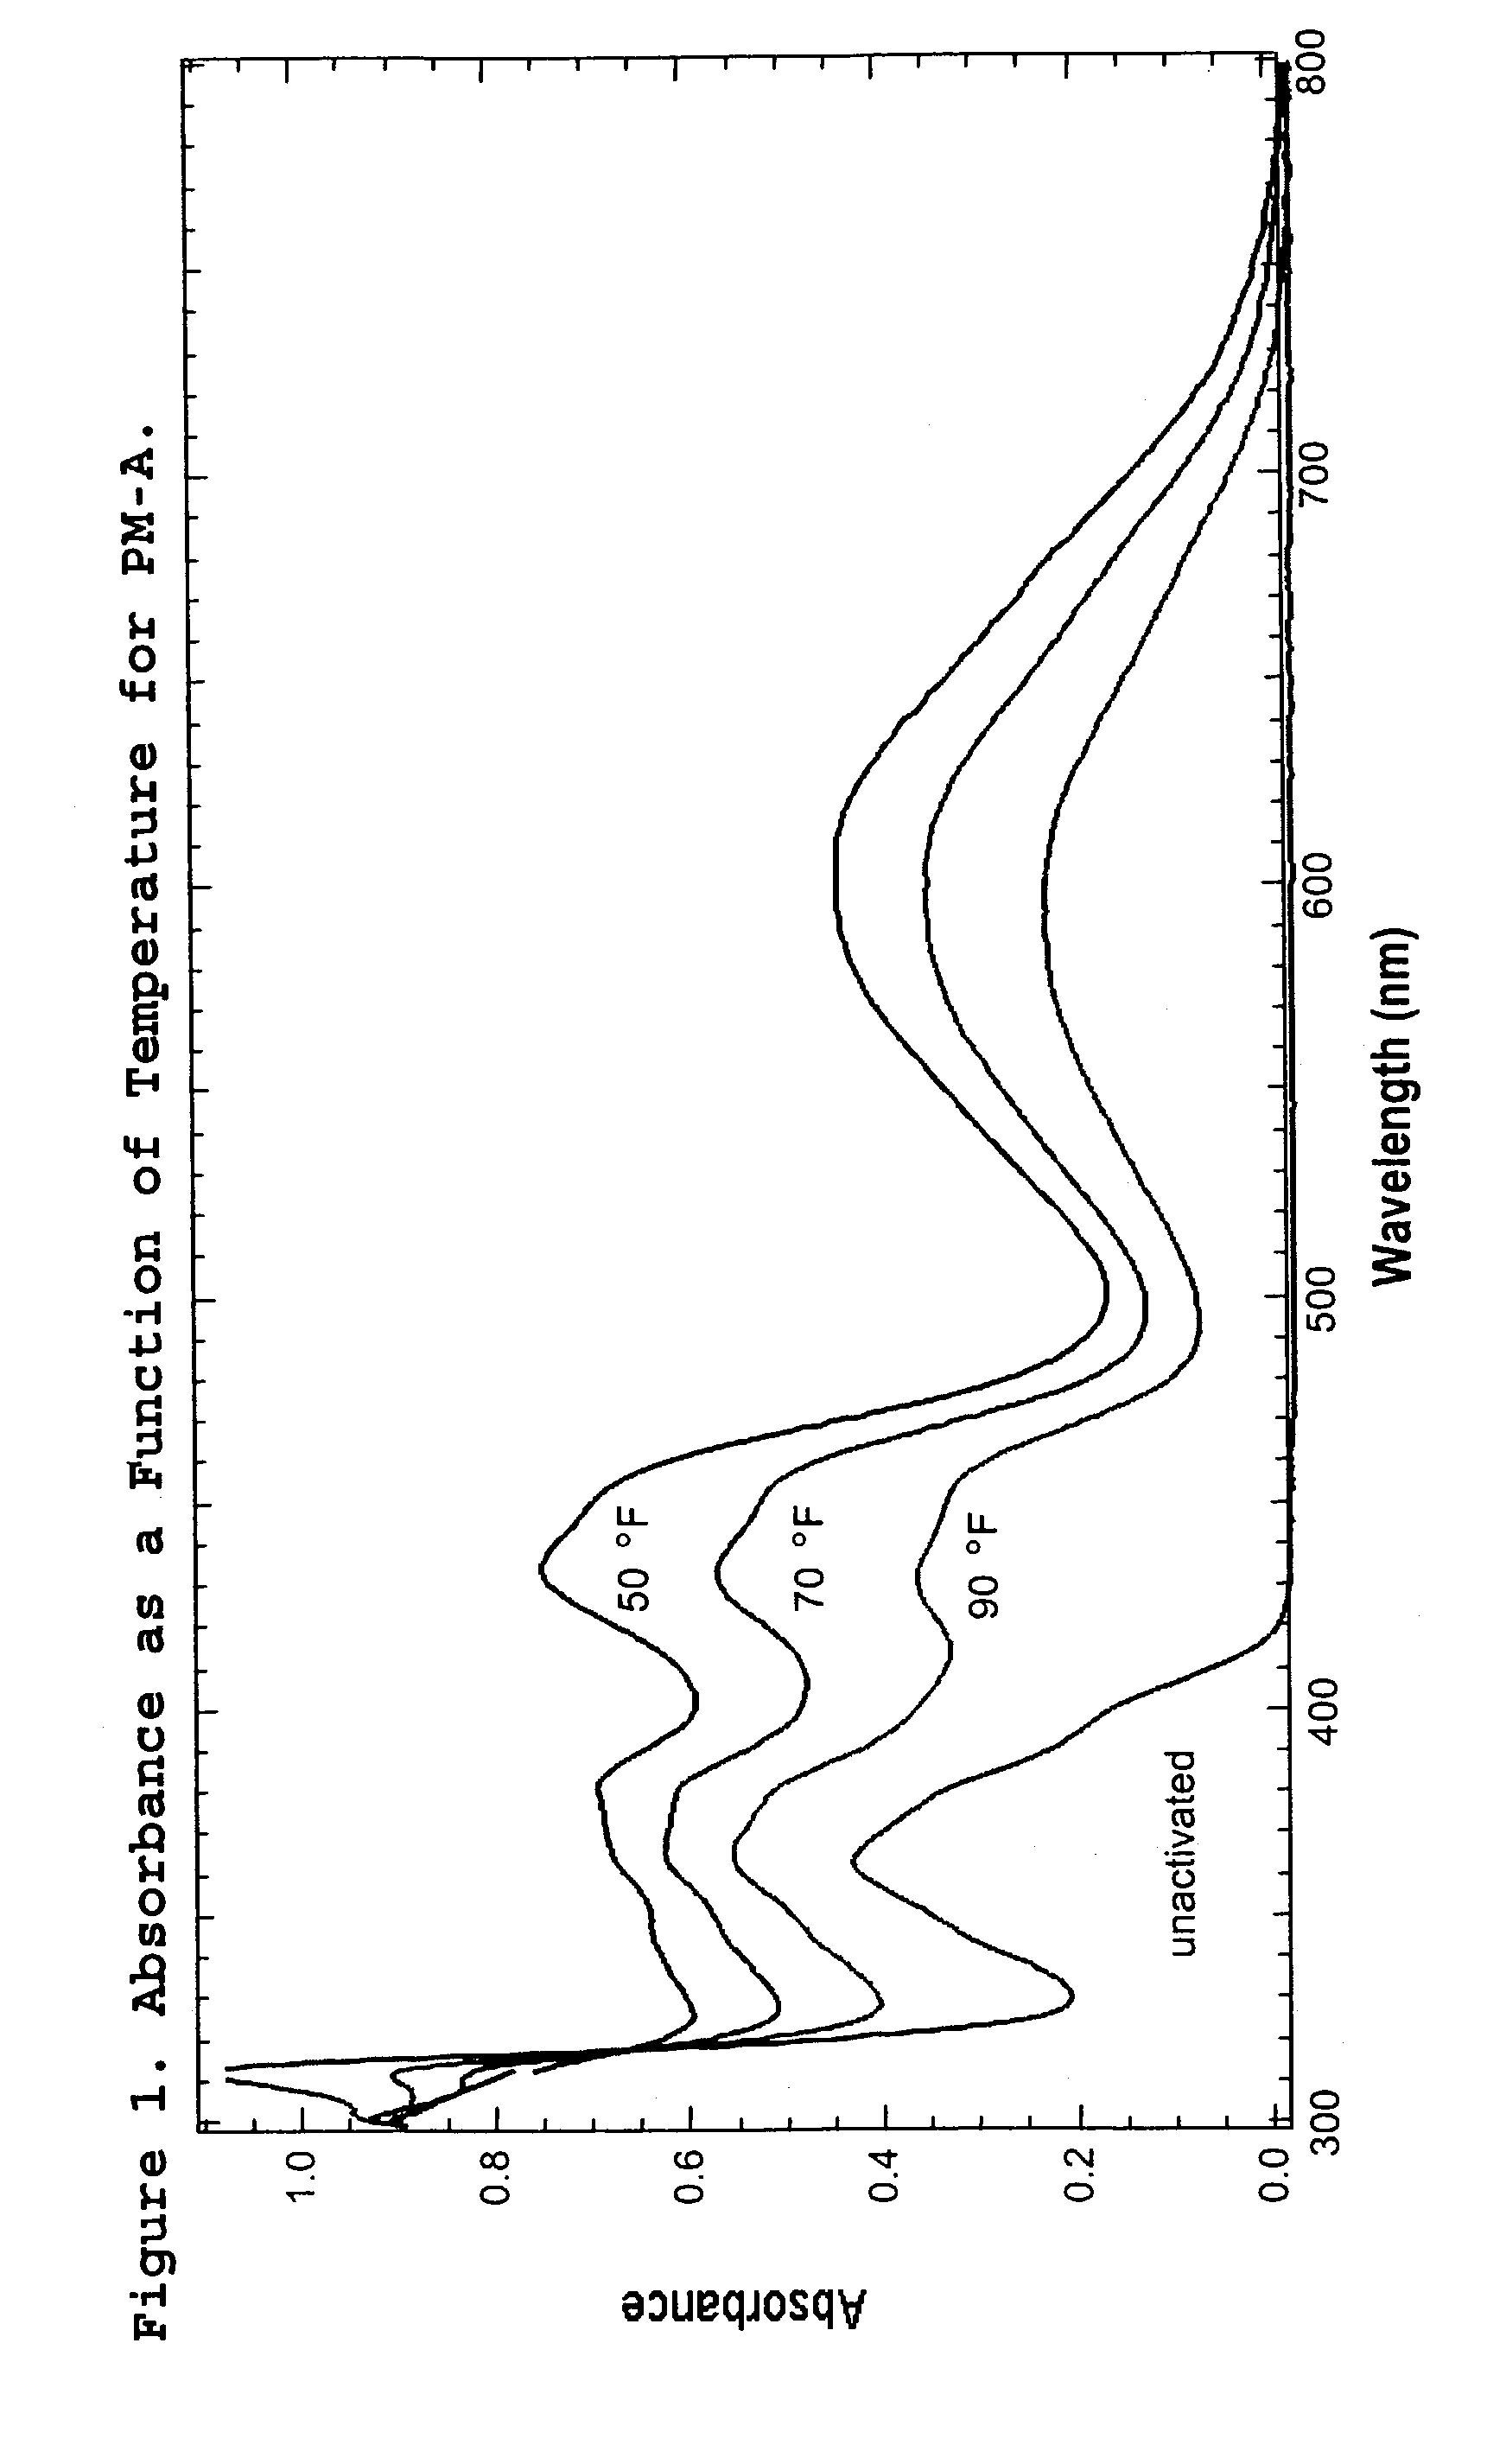 Photochromic articles with reduced temperature dependency and methods for preparation